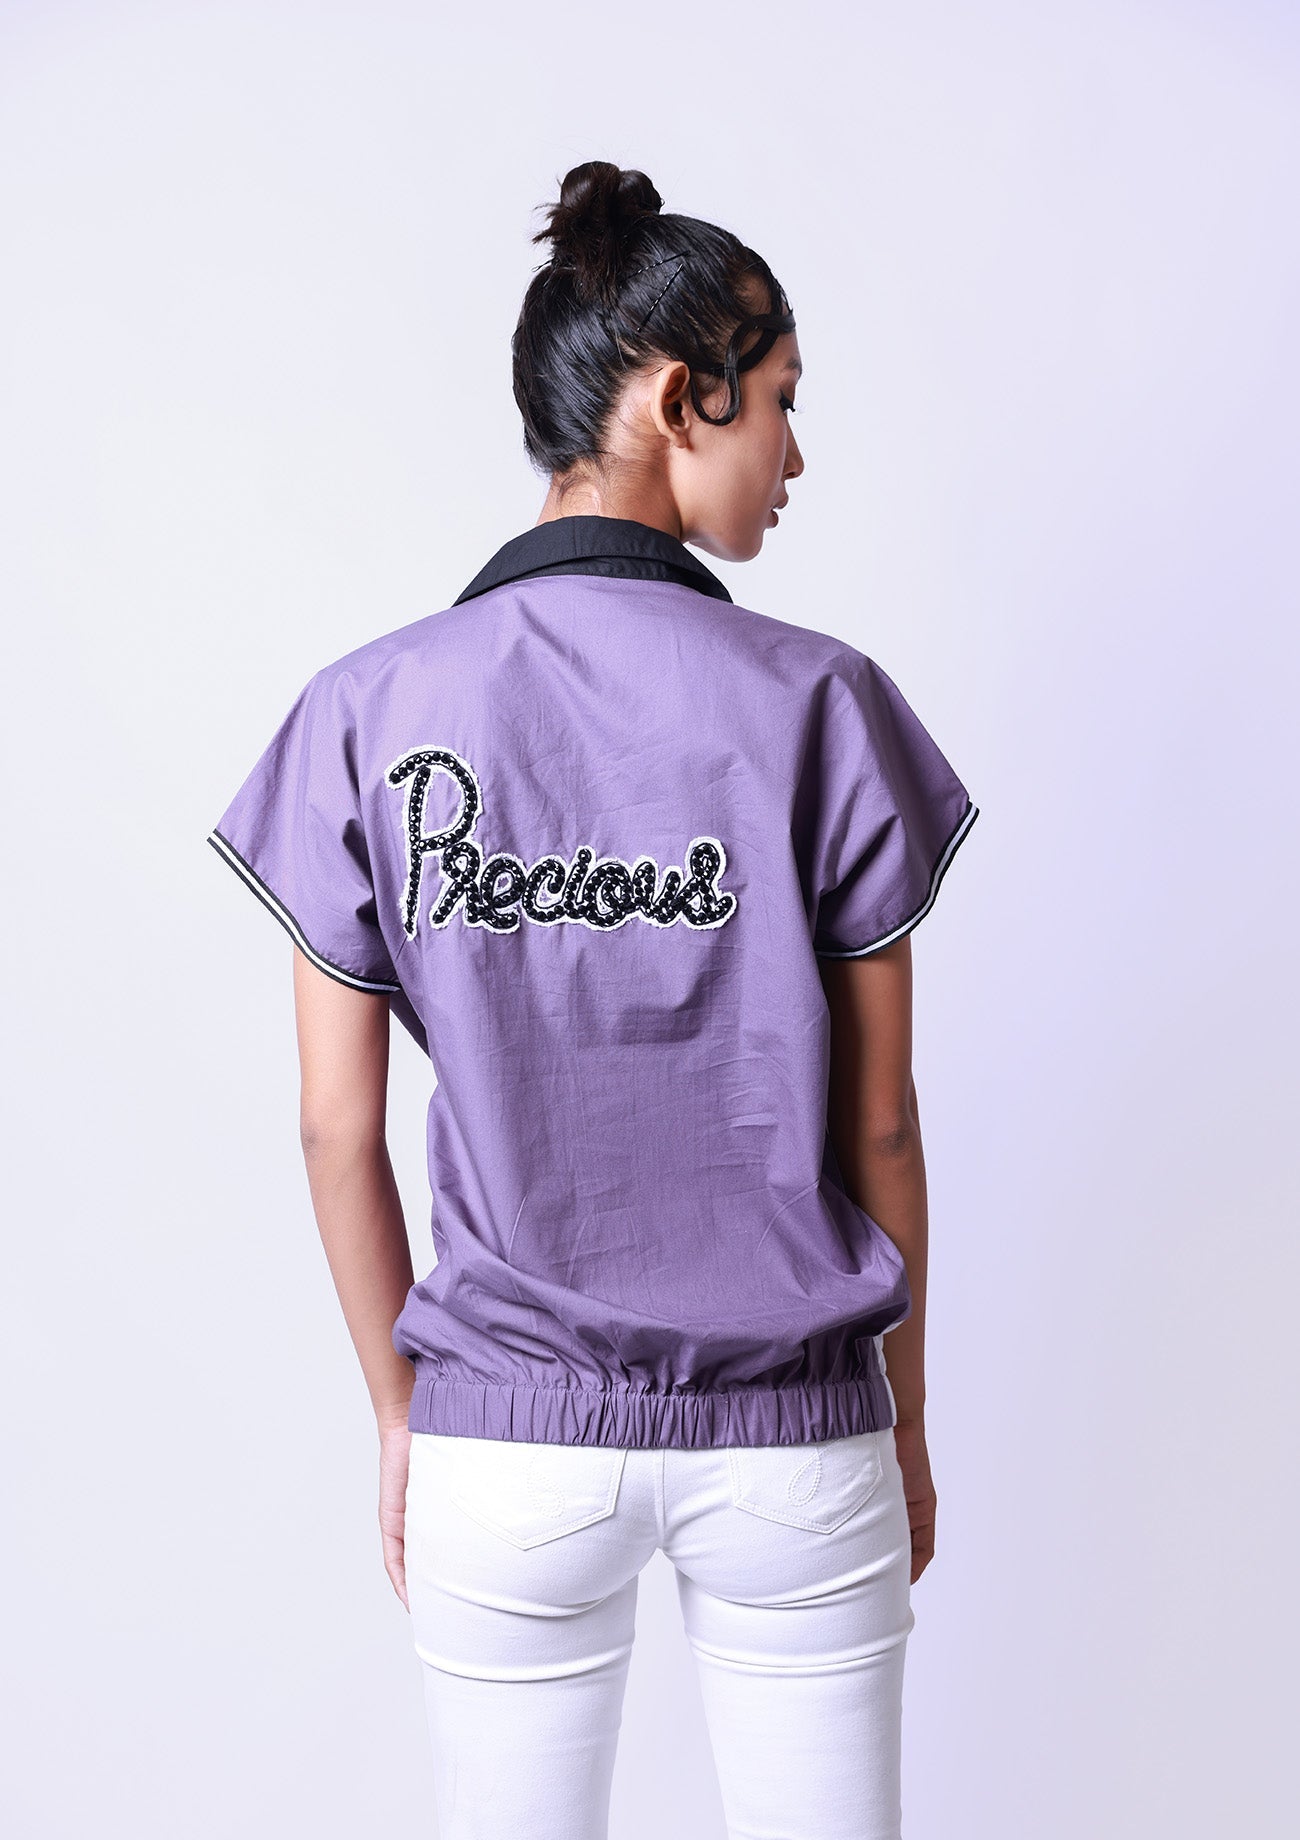 Lilac / White Cotton Half Zipper Bomber Top With Embroidered Pocket With Slogan Embroidererd On Lilac Back